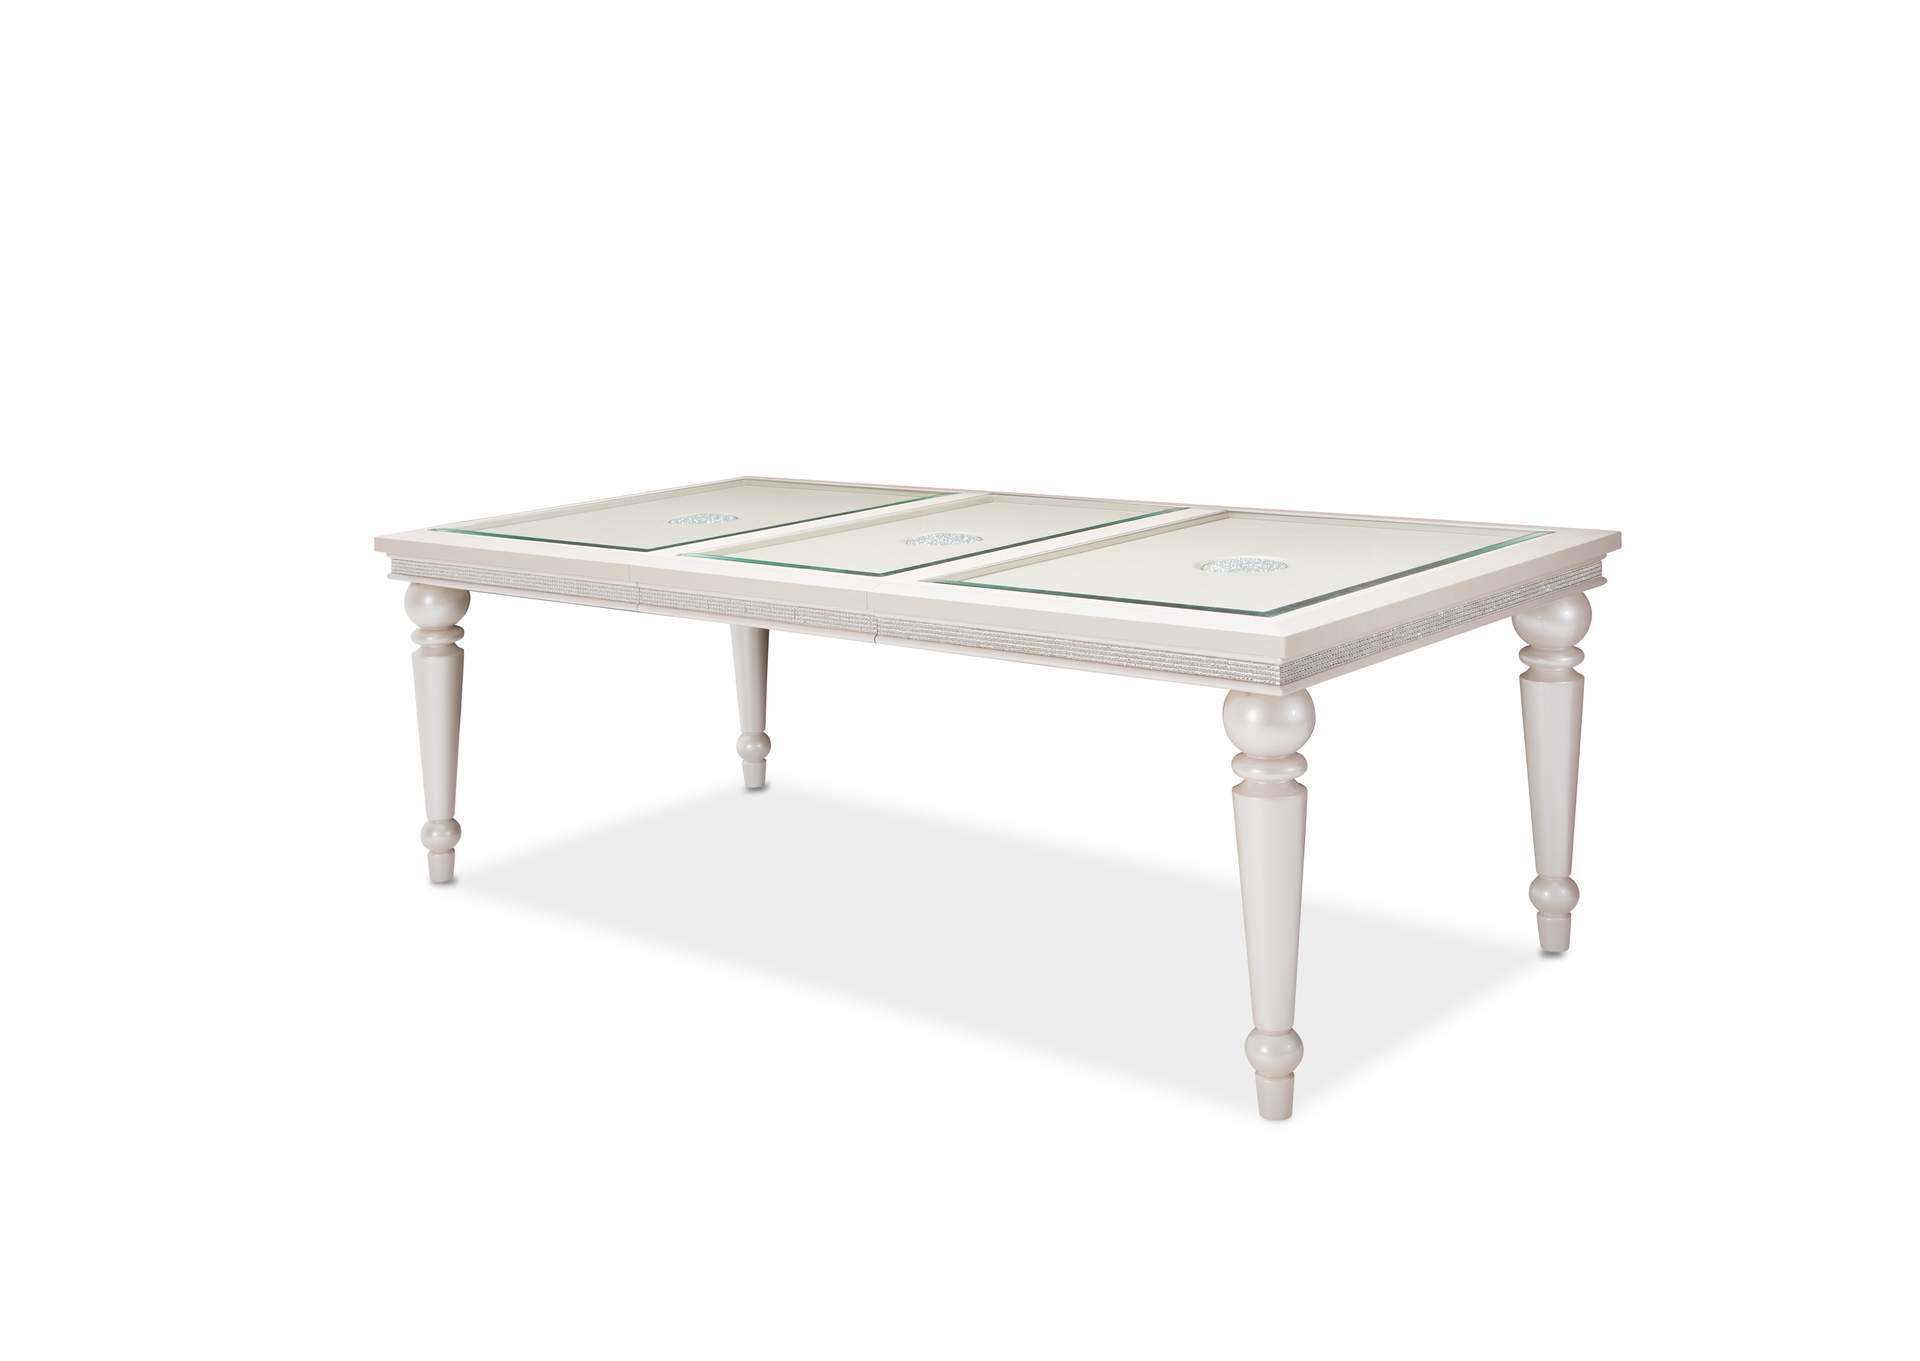 Glimmering Heights 4 Leg Base Dining Table Ivory,Michael Amini (AICO)